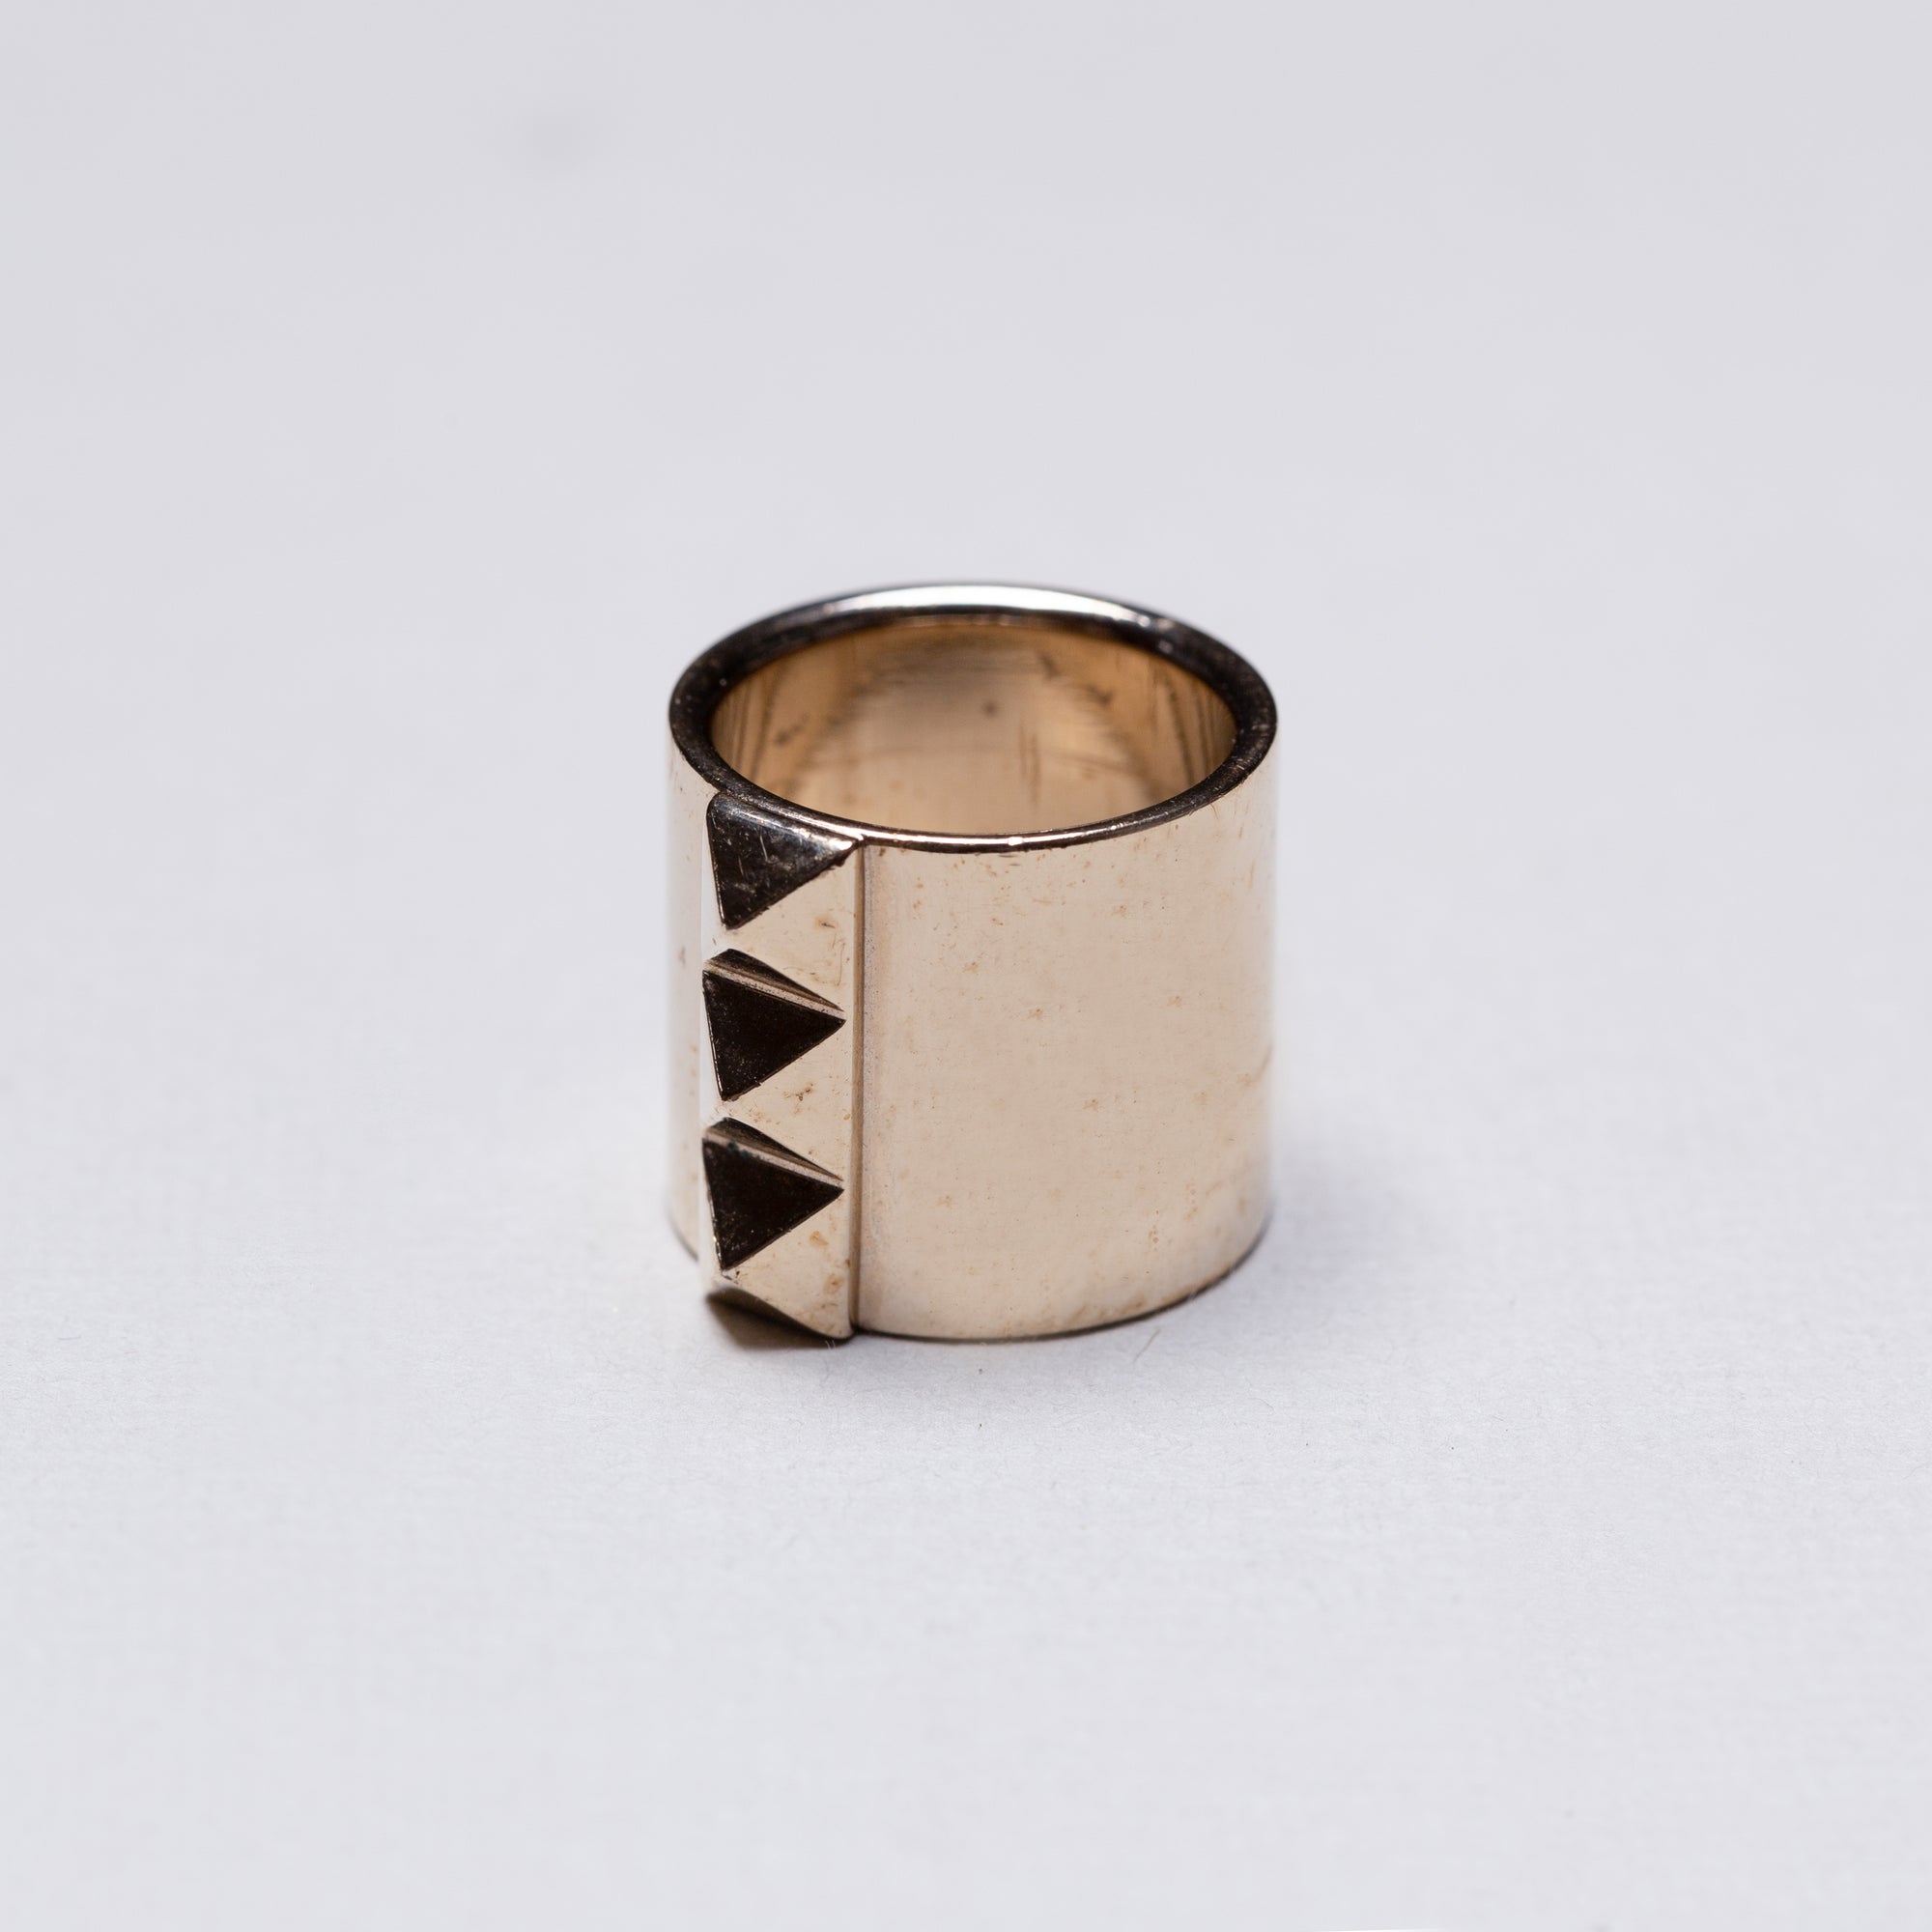 Vintage Valentino Chunky Ring with Rockstuds